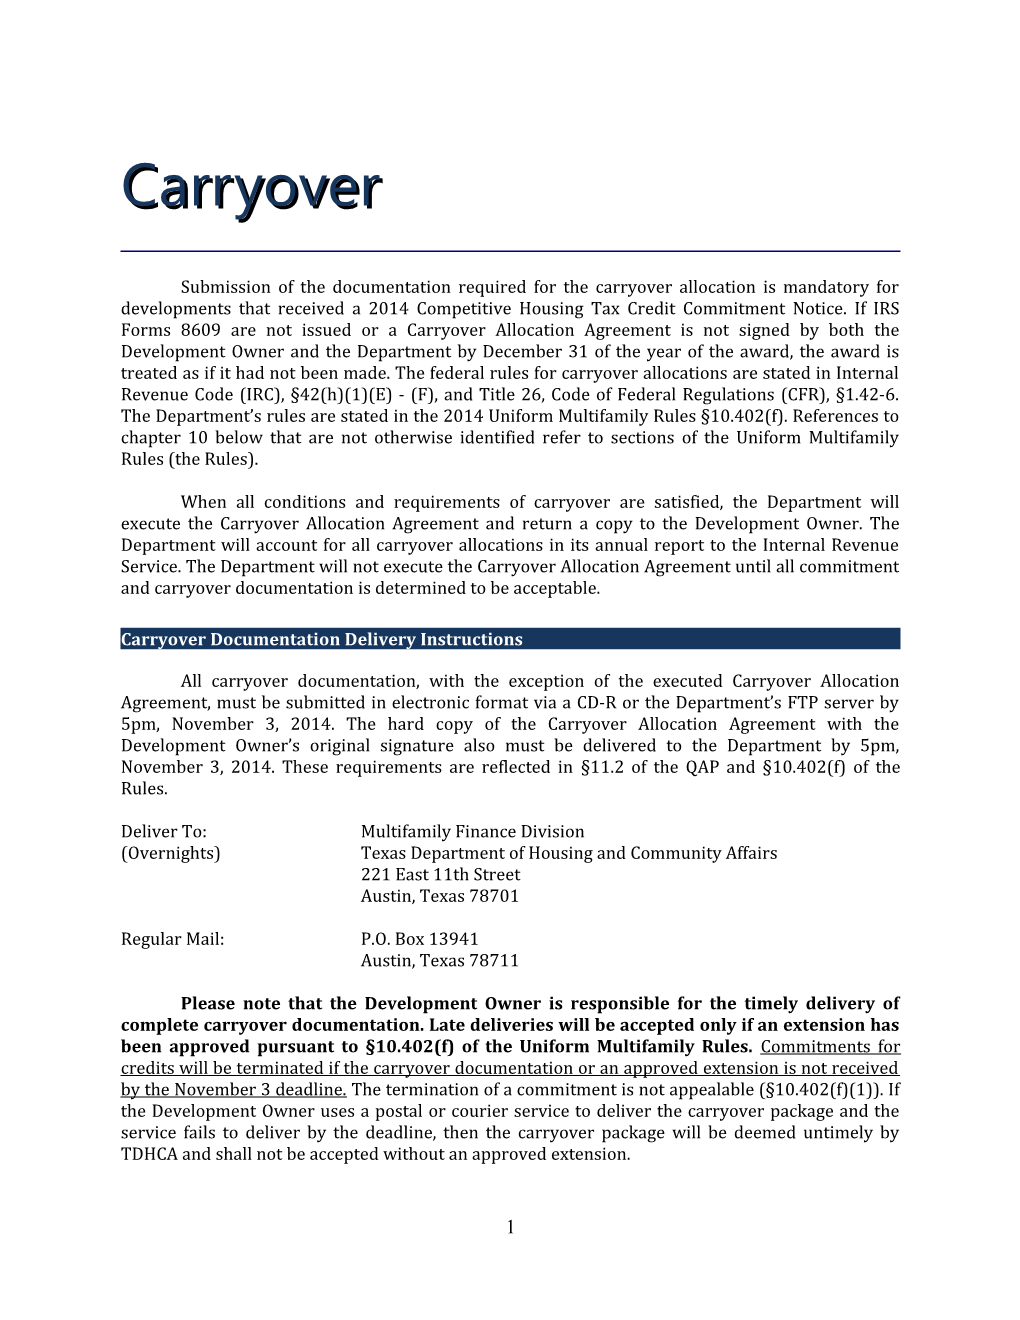 Carryover Documentation Delivery Instructions